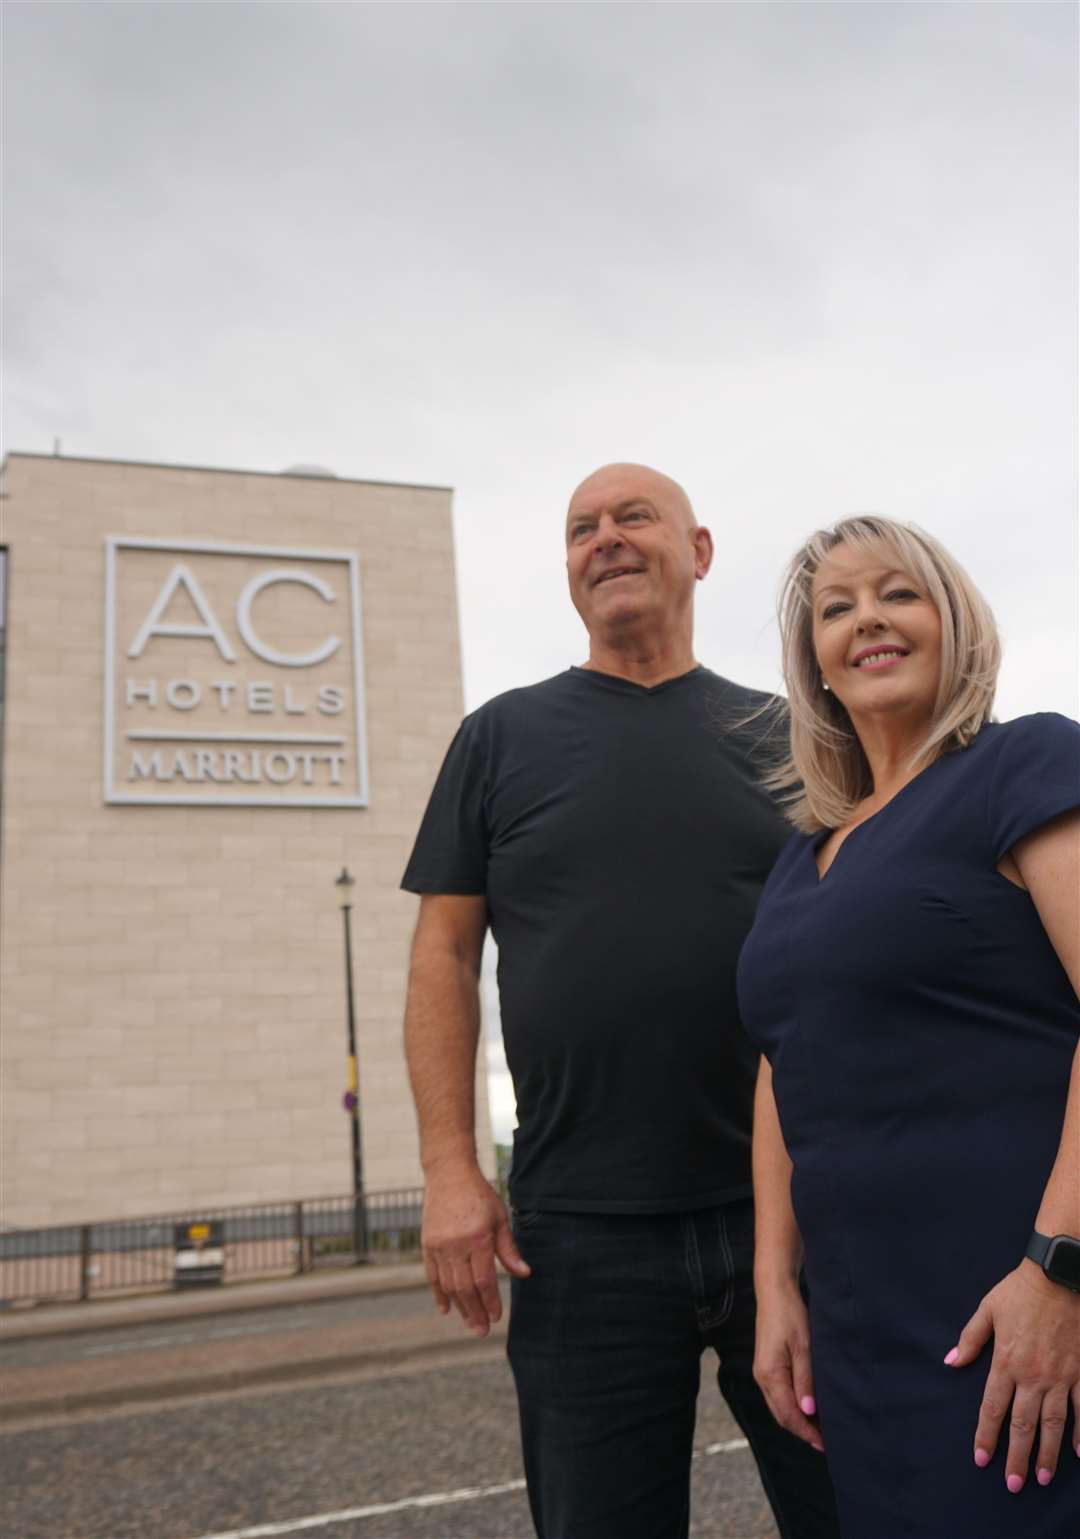 John Farrelly, Corporate Commercial Lead at Hotel Co 51, and Tracey Mottram, General Manager at AC by Marriott Inverness. Pictures: Federica Stefani.